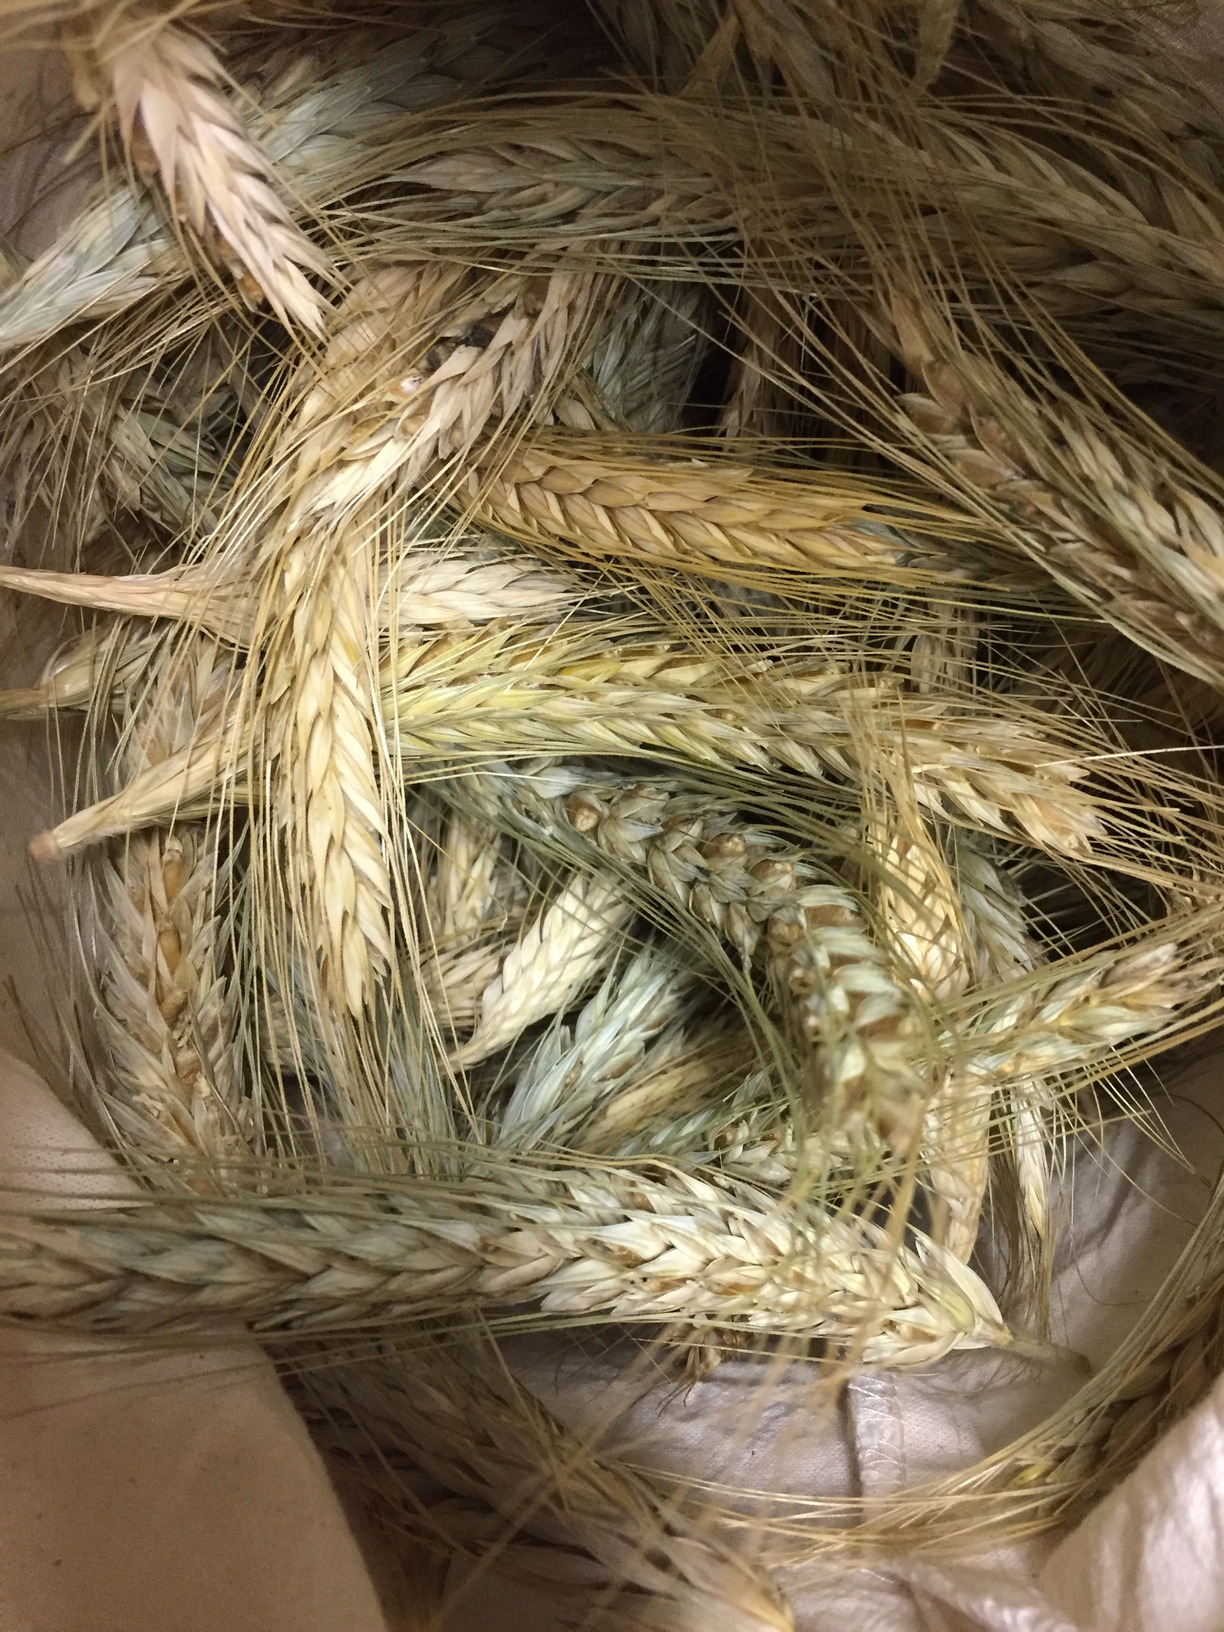 Wheat heads after two weeks of drying.